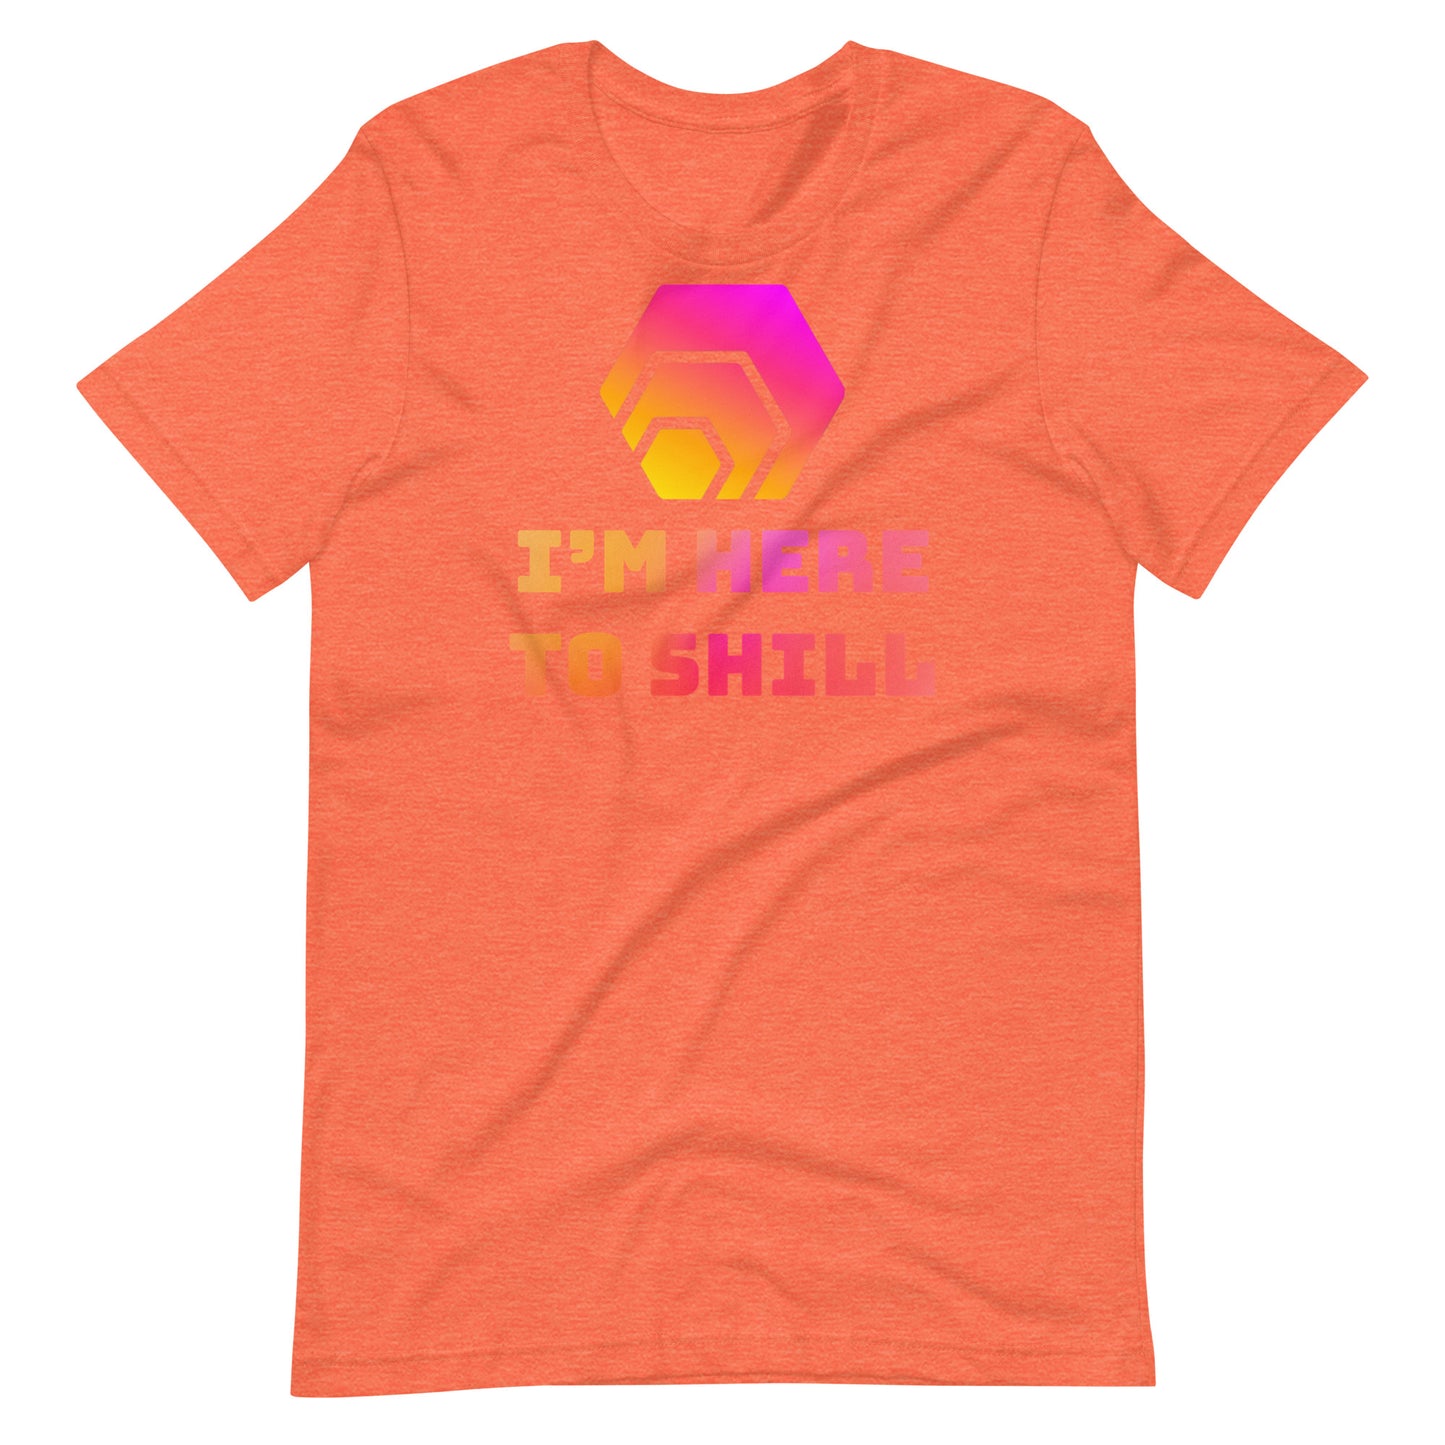 HEX - I'm Here To Shill Unisex T-Shirt